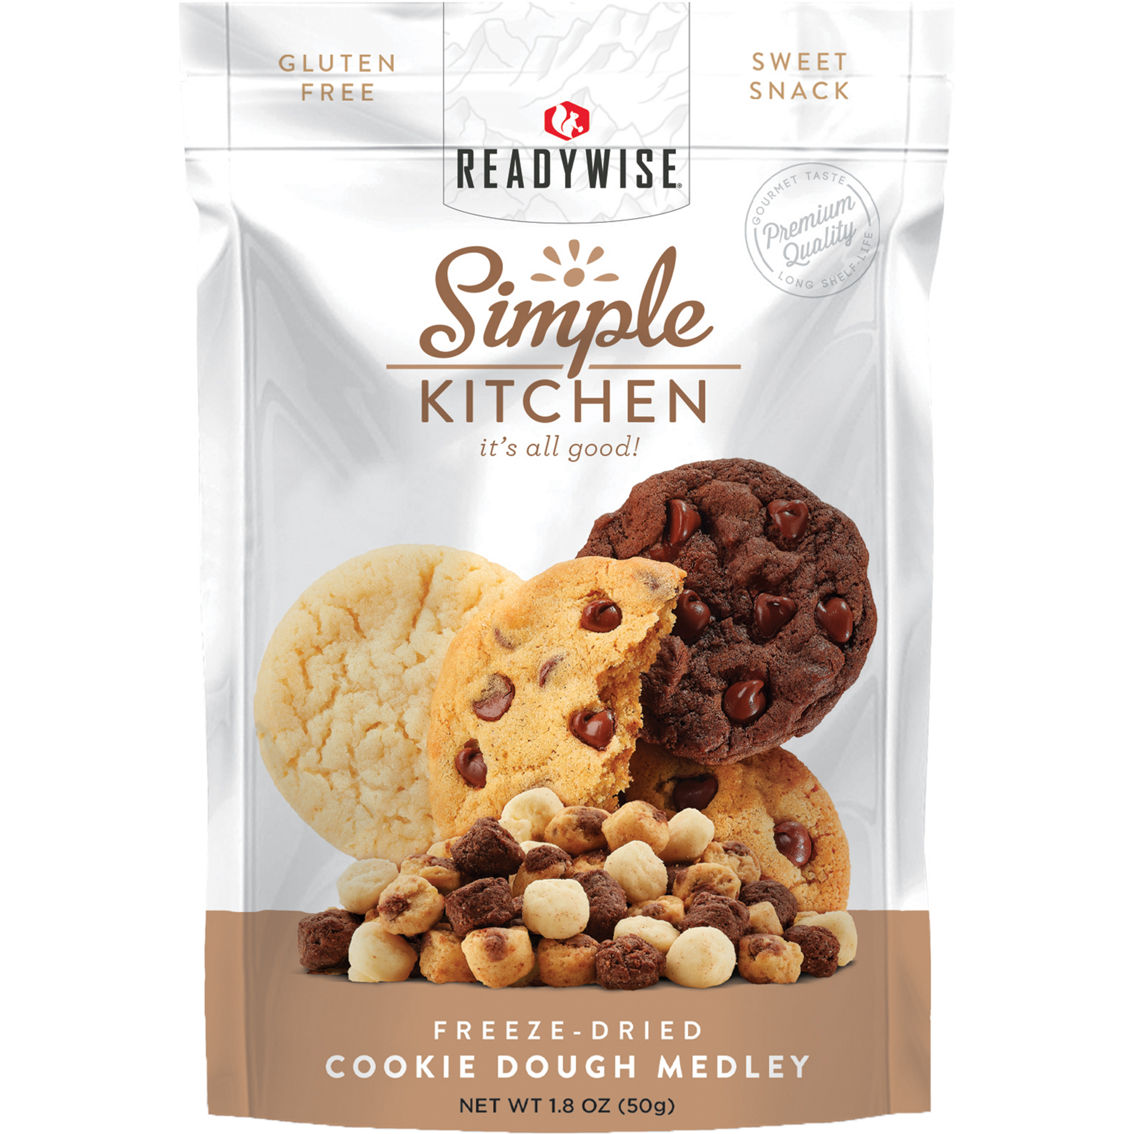 ReadyWise Simple Kitchen Sweet Treat Variety Pack 4 pk. - Image 3 of 10